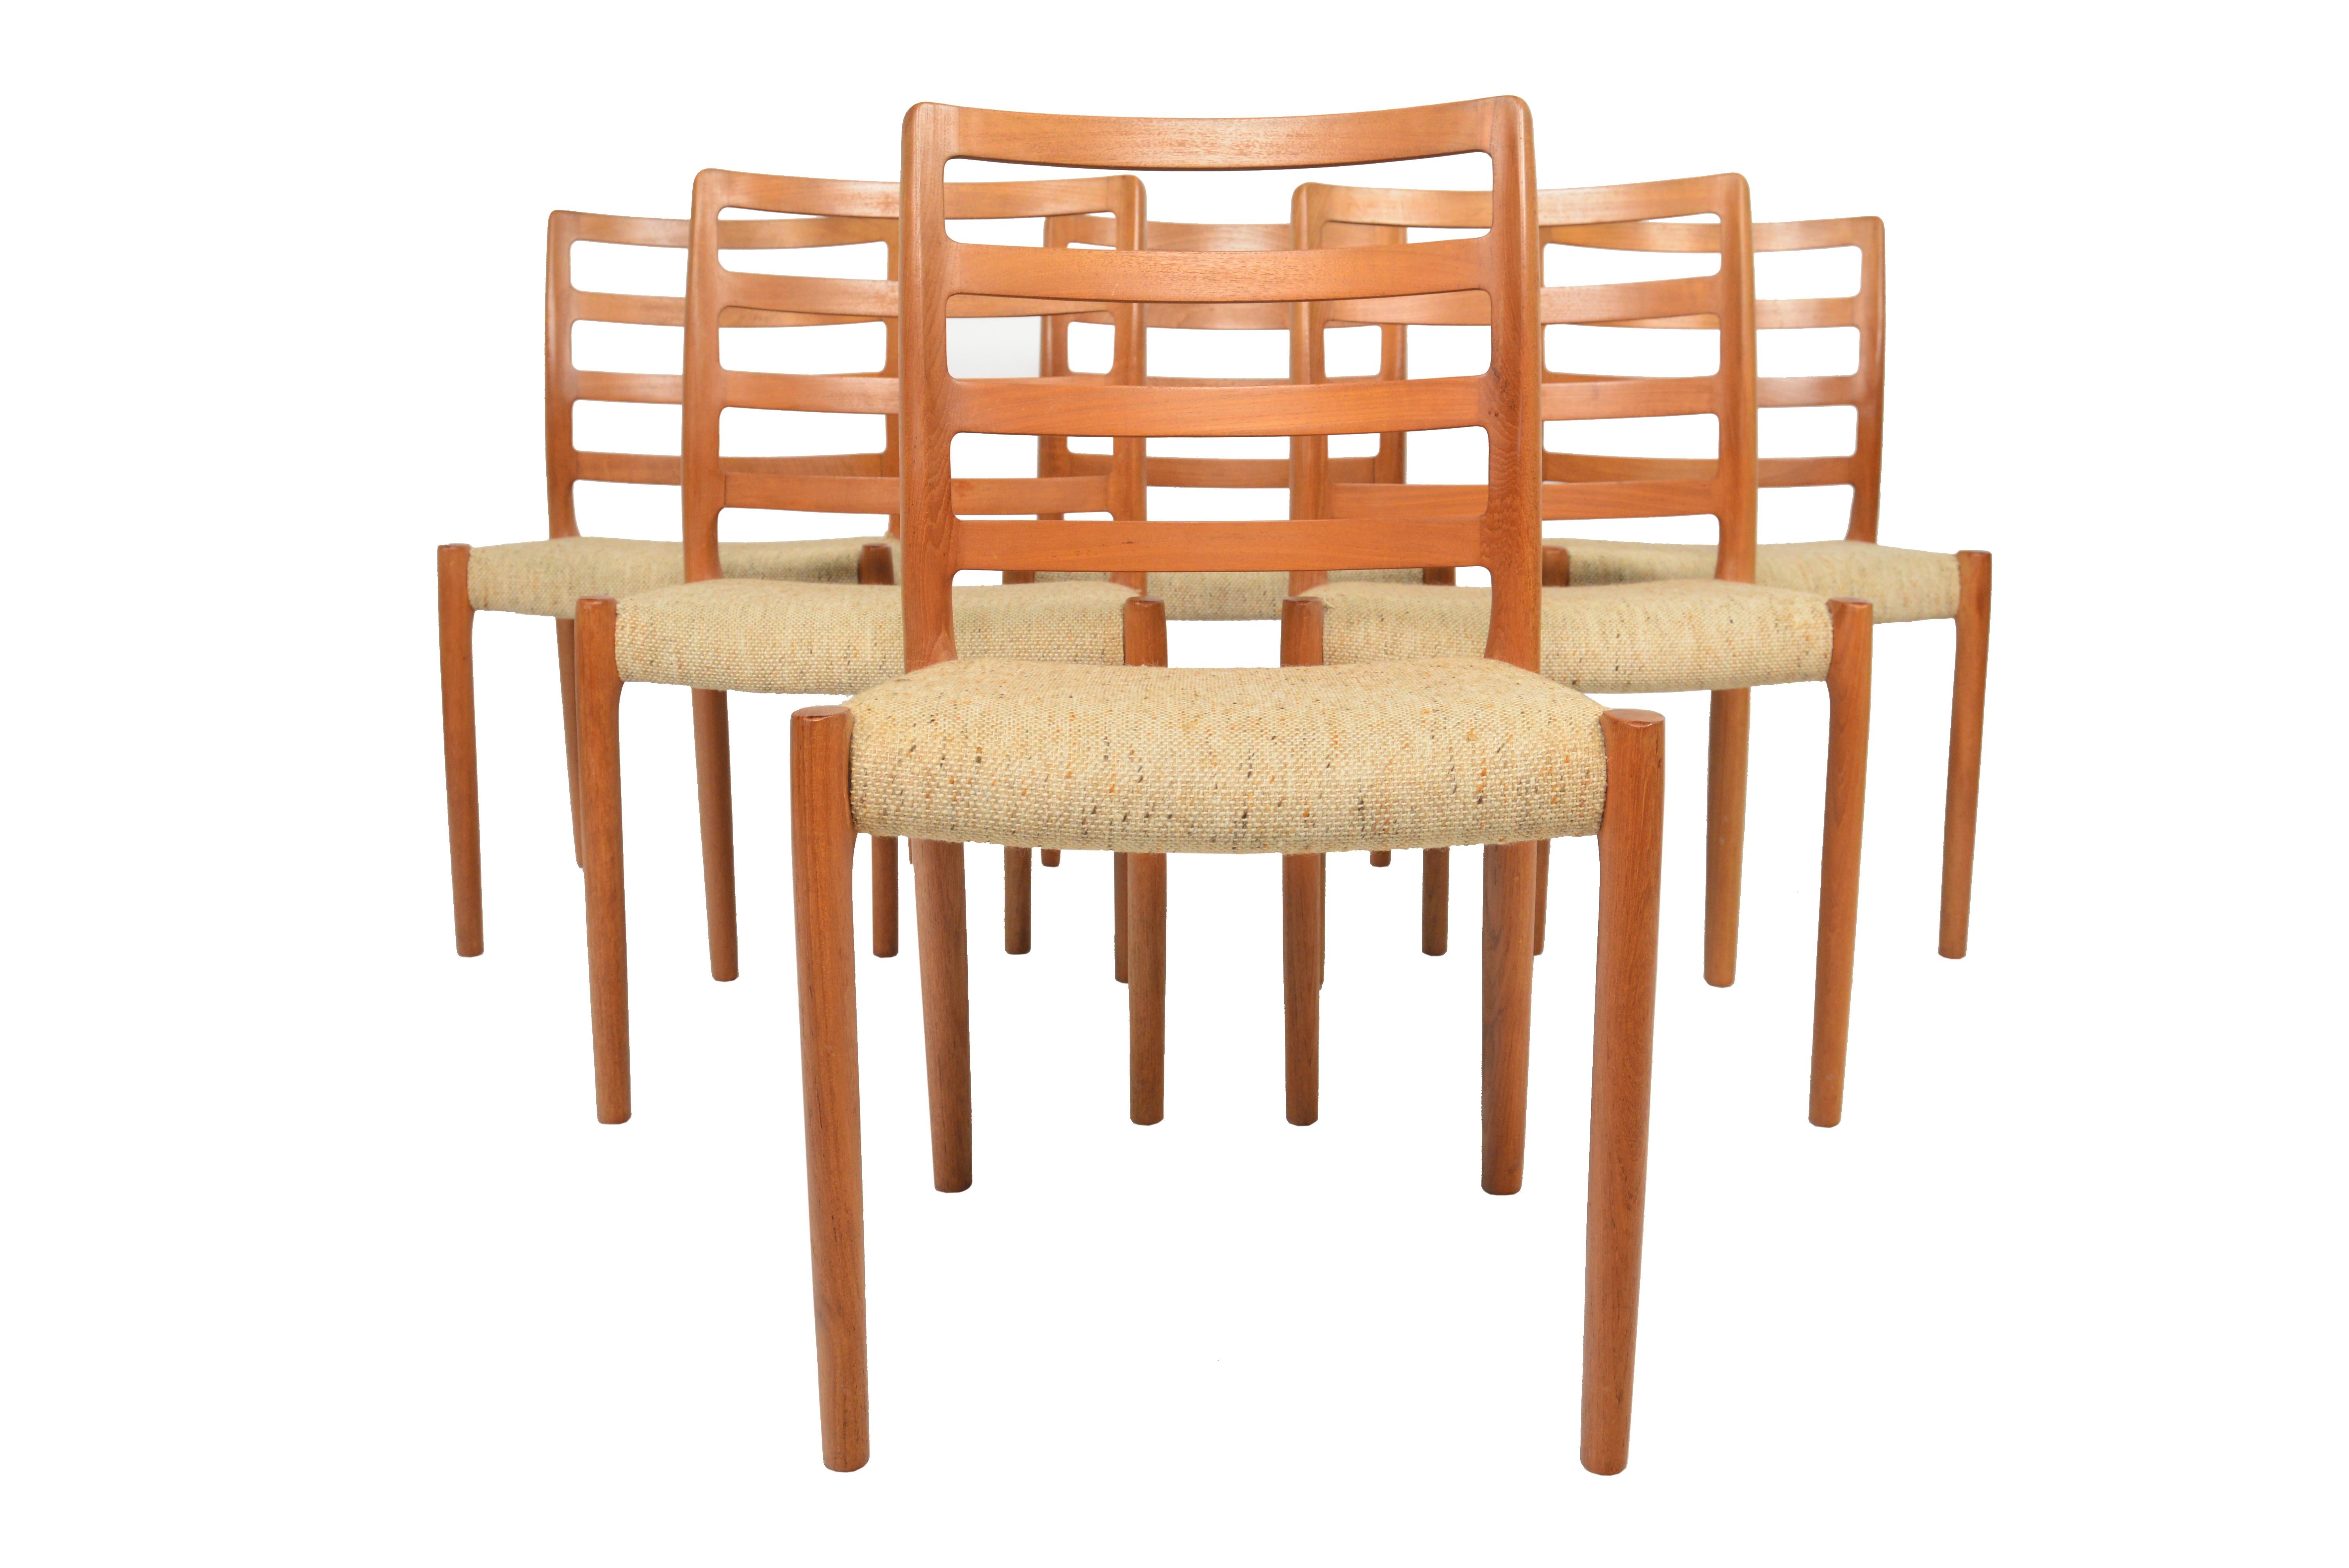 This beautiful set of six Model 85 teak dining chairs was designed by Niels Otto Møller for J.L. Møllers Møbelfabrik in 1981. Crafted in teak these chairs were designed with a focus on ergonomics and seamless construction. Seats wear their original